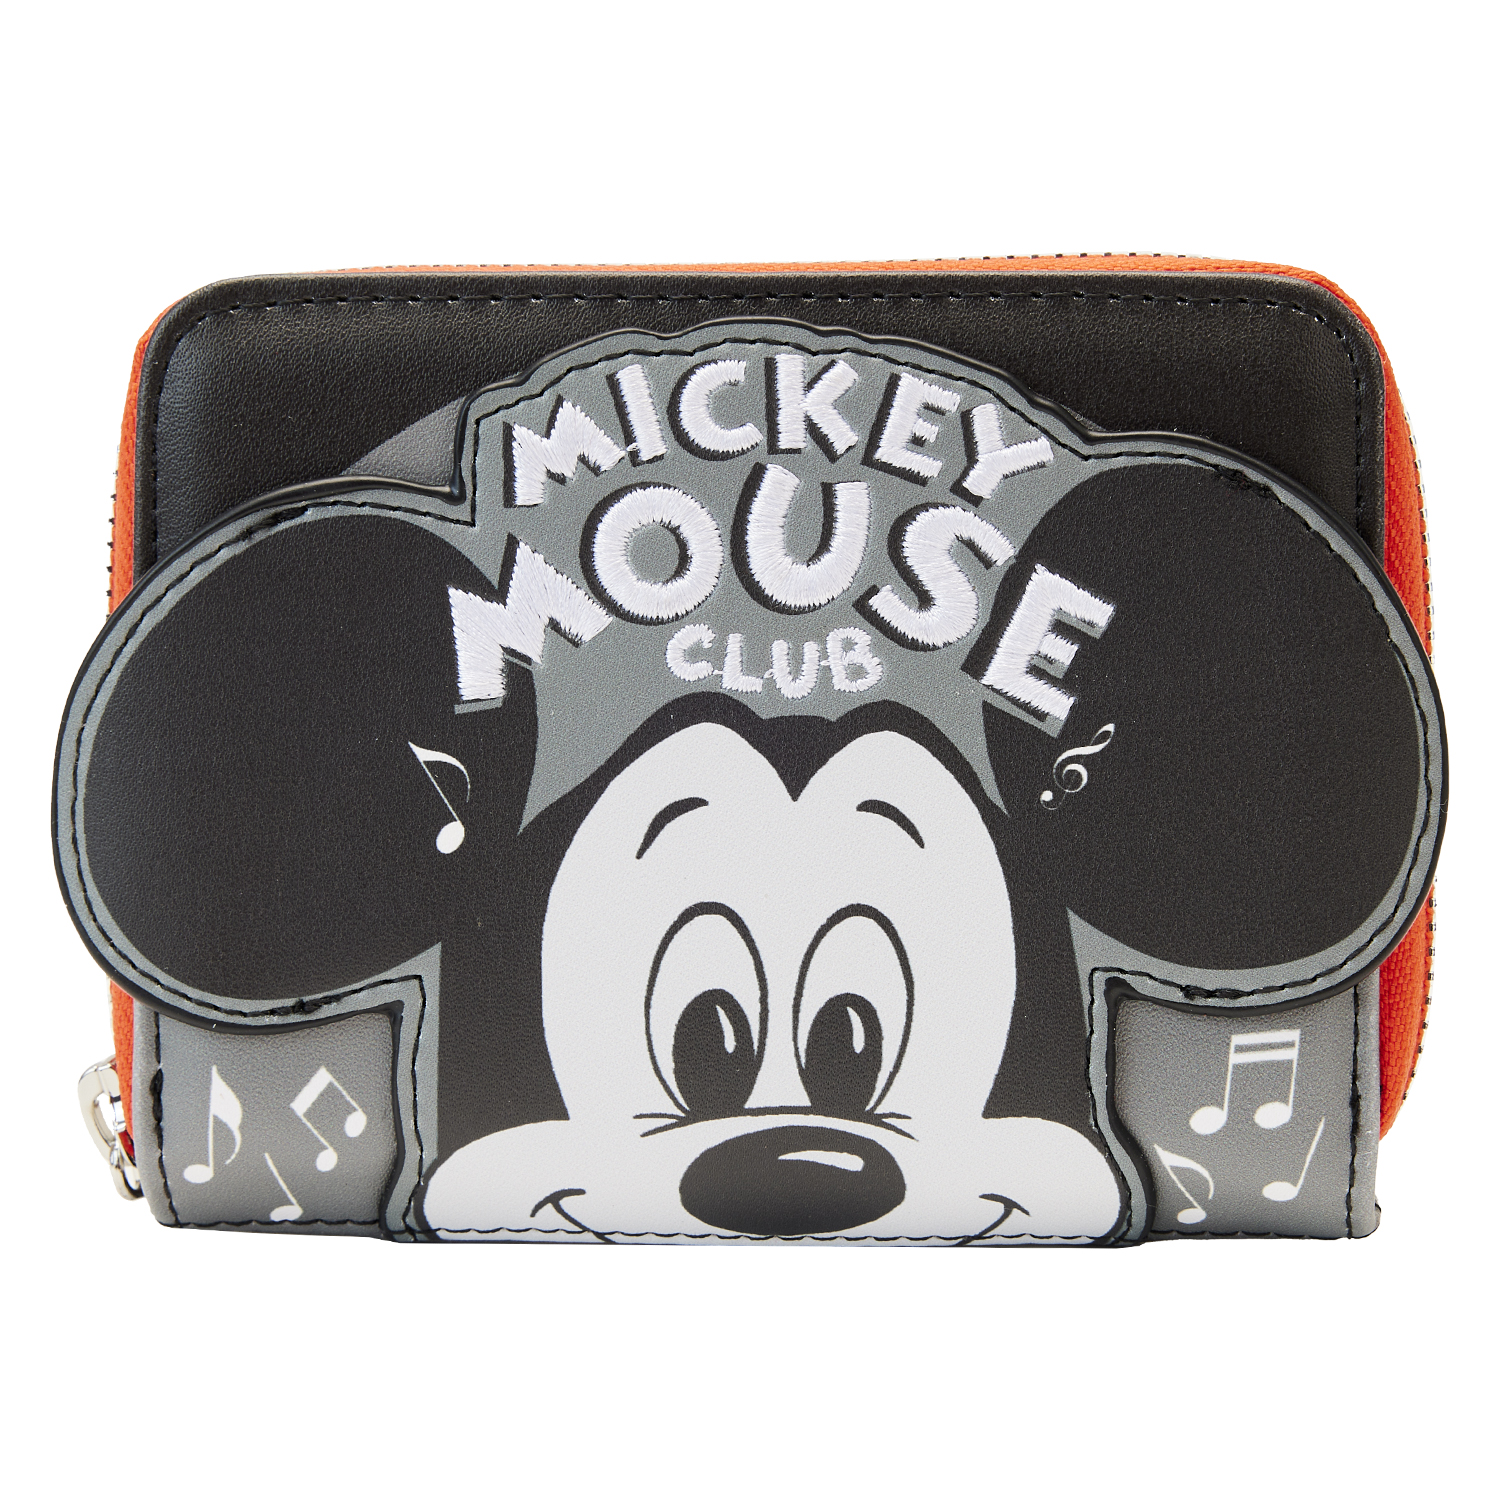 Buy Disney100 Mickey Mouse Club Zip Around Wallet at Loungefly.